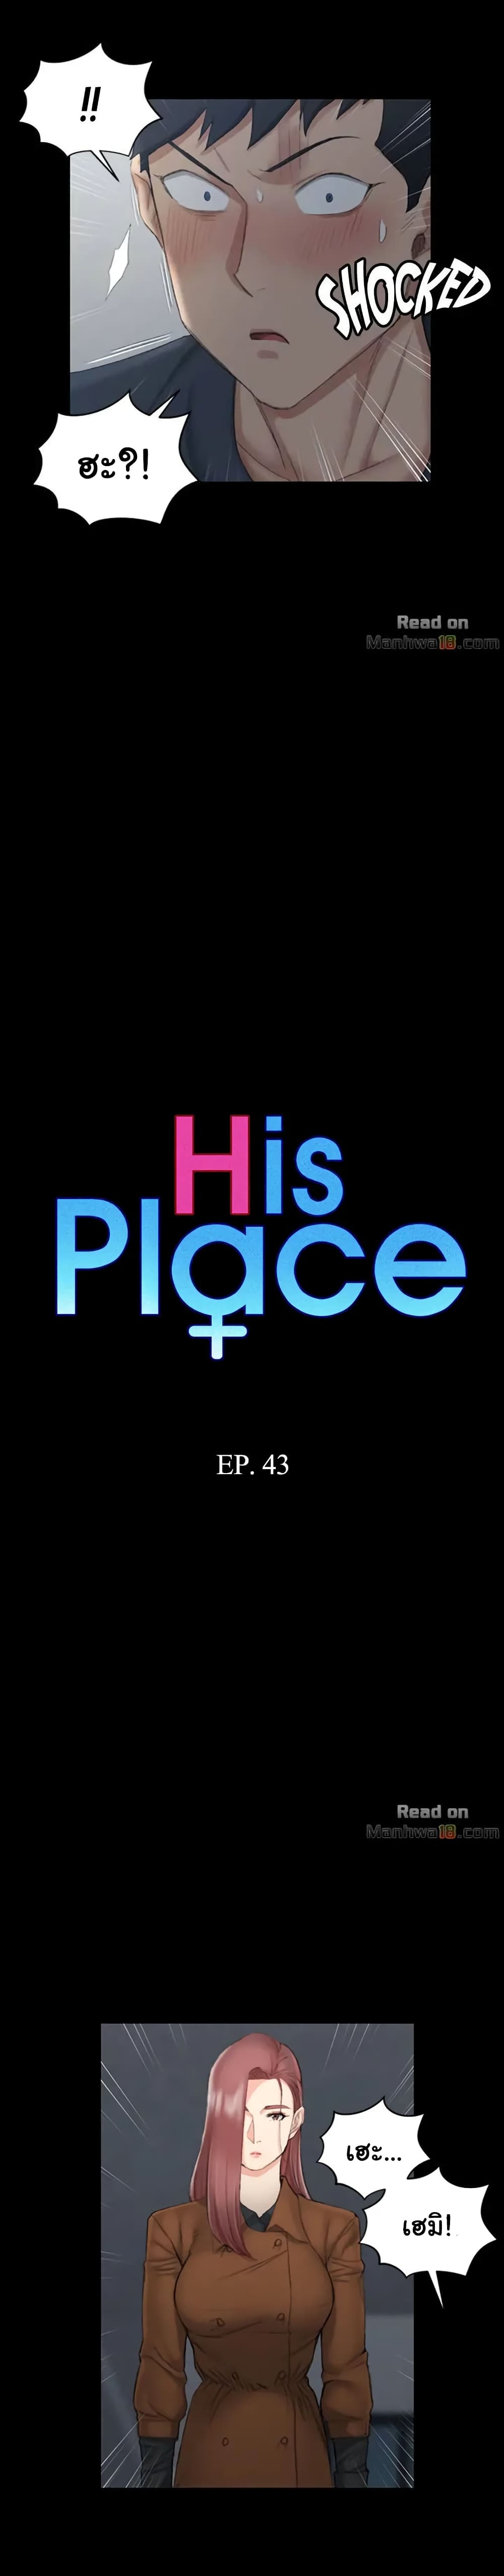 His Place 43-43